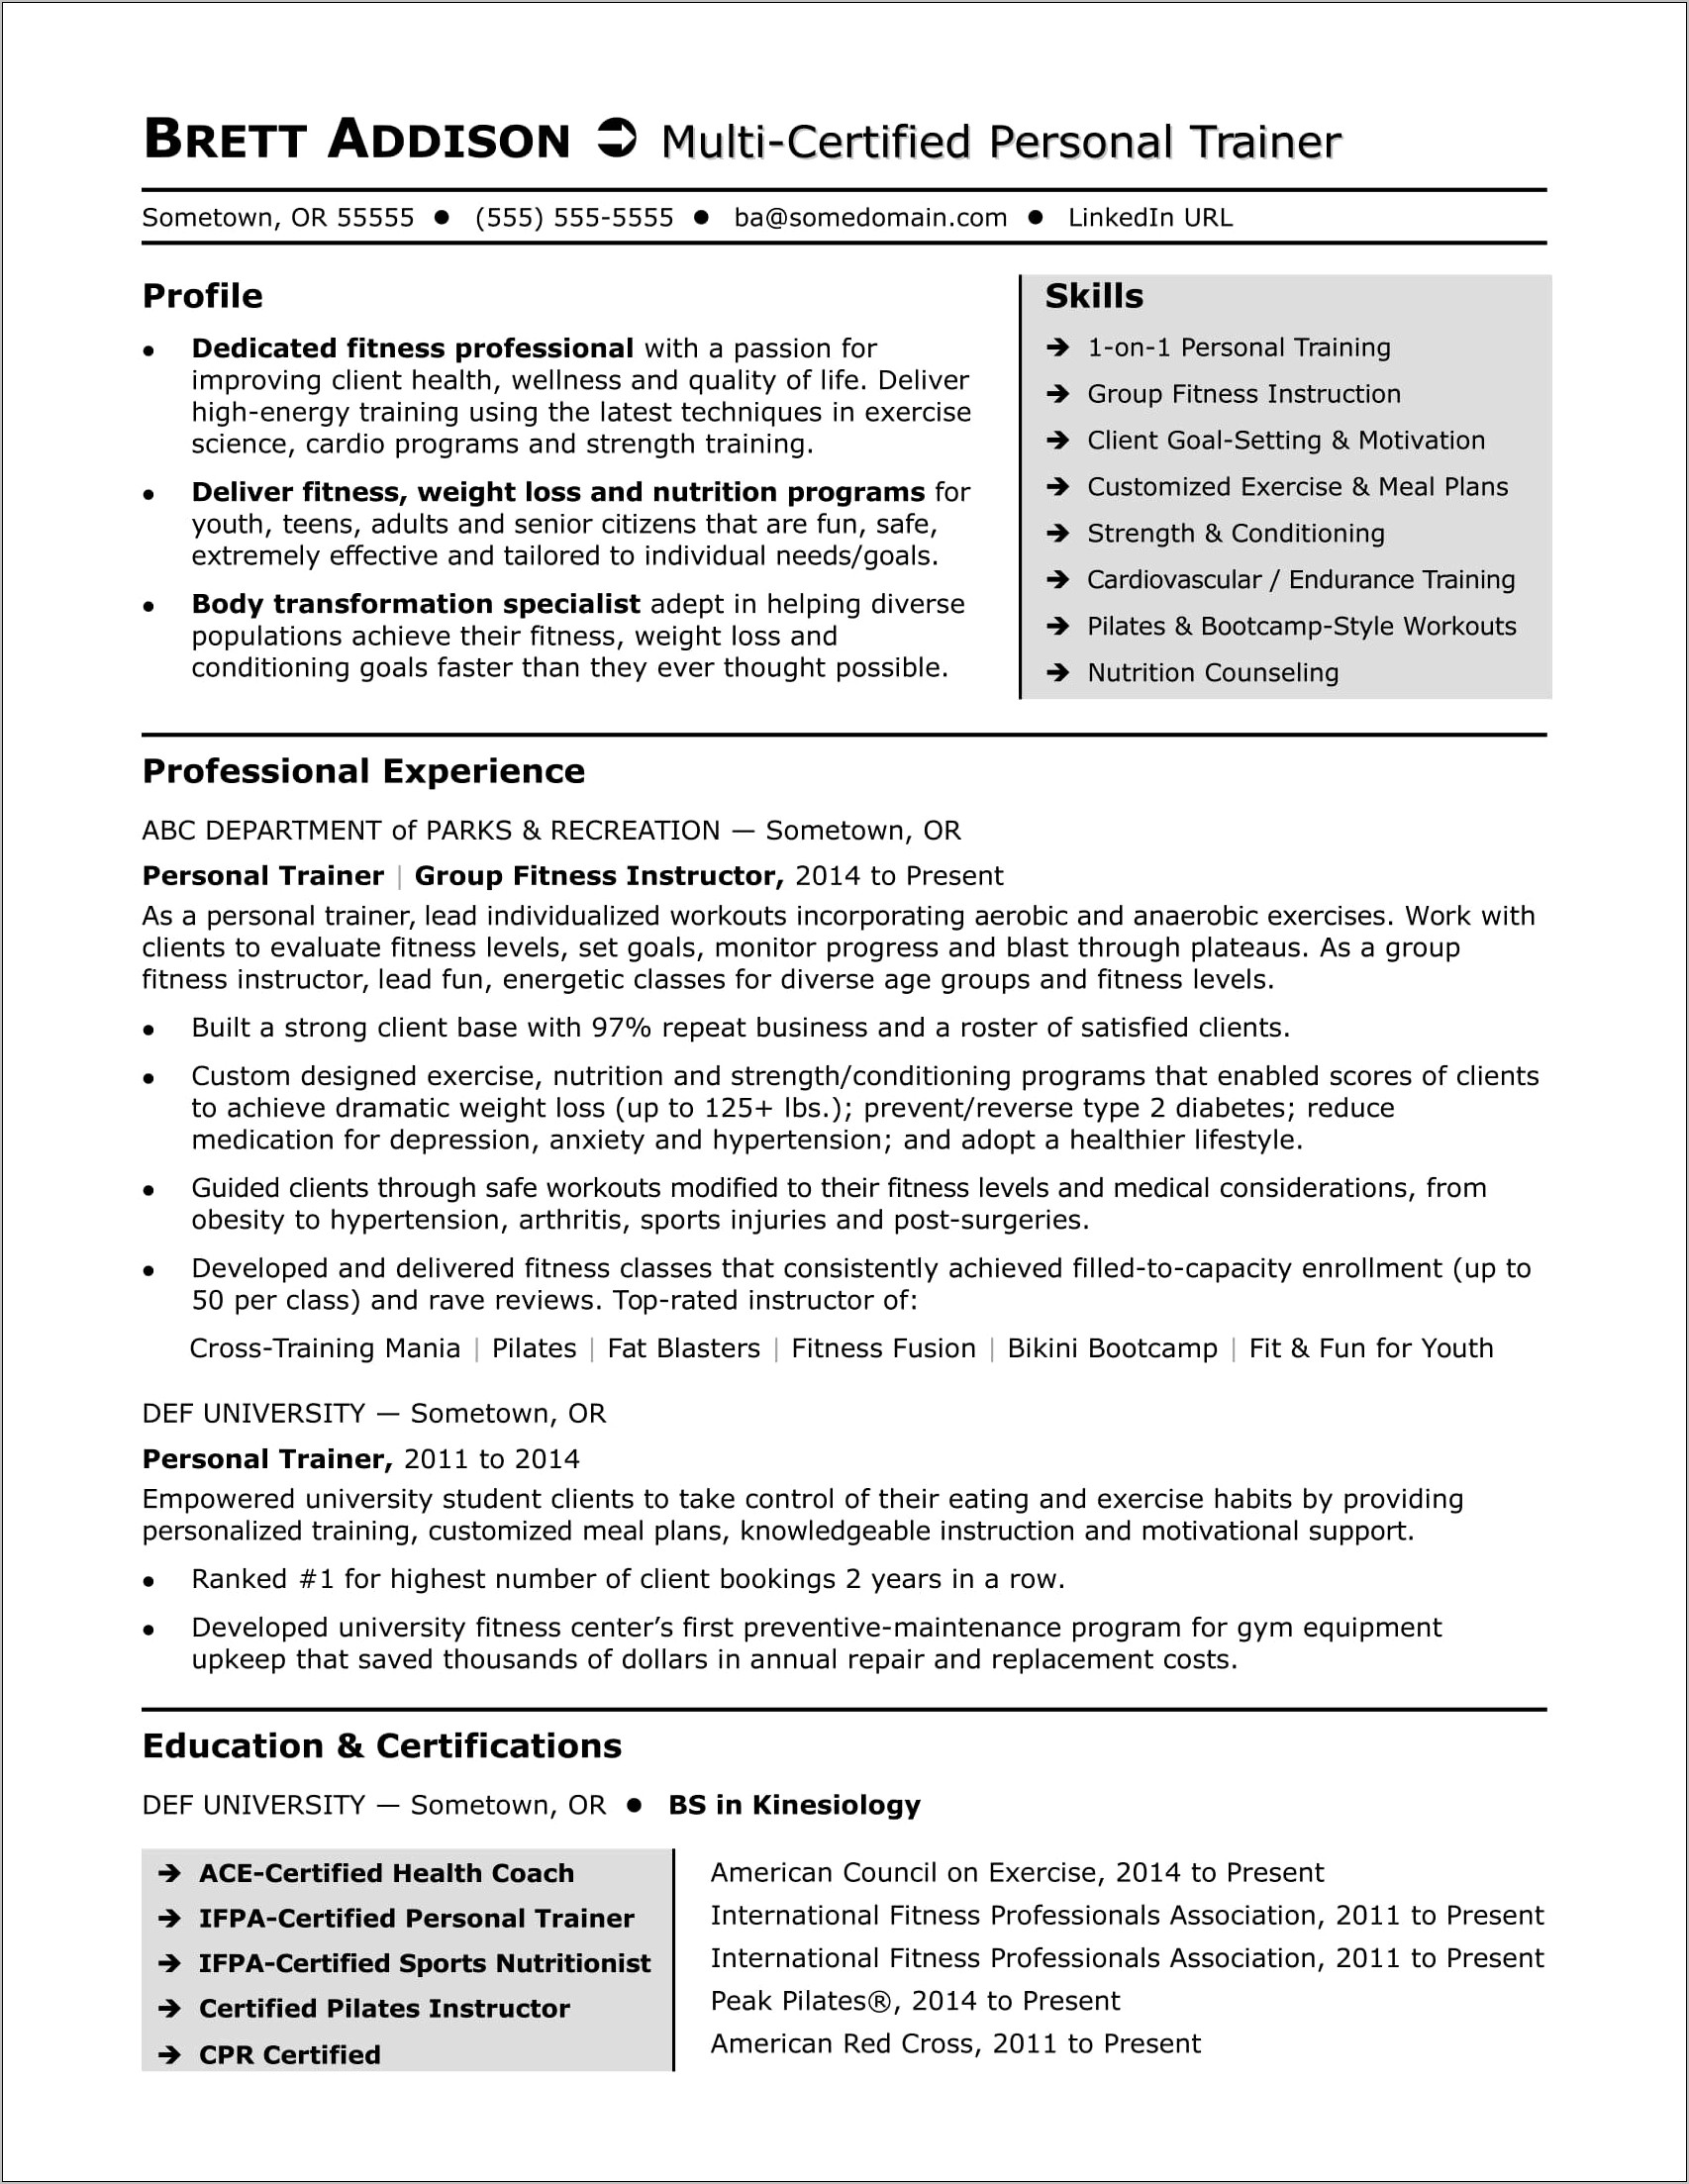 Sample Resume For A Health Coach